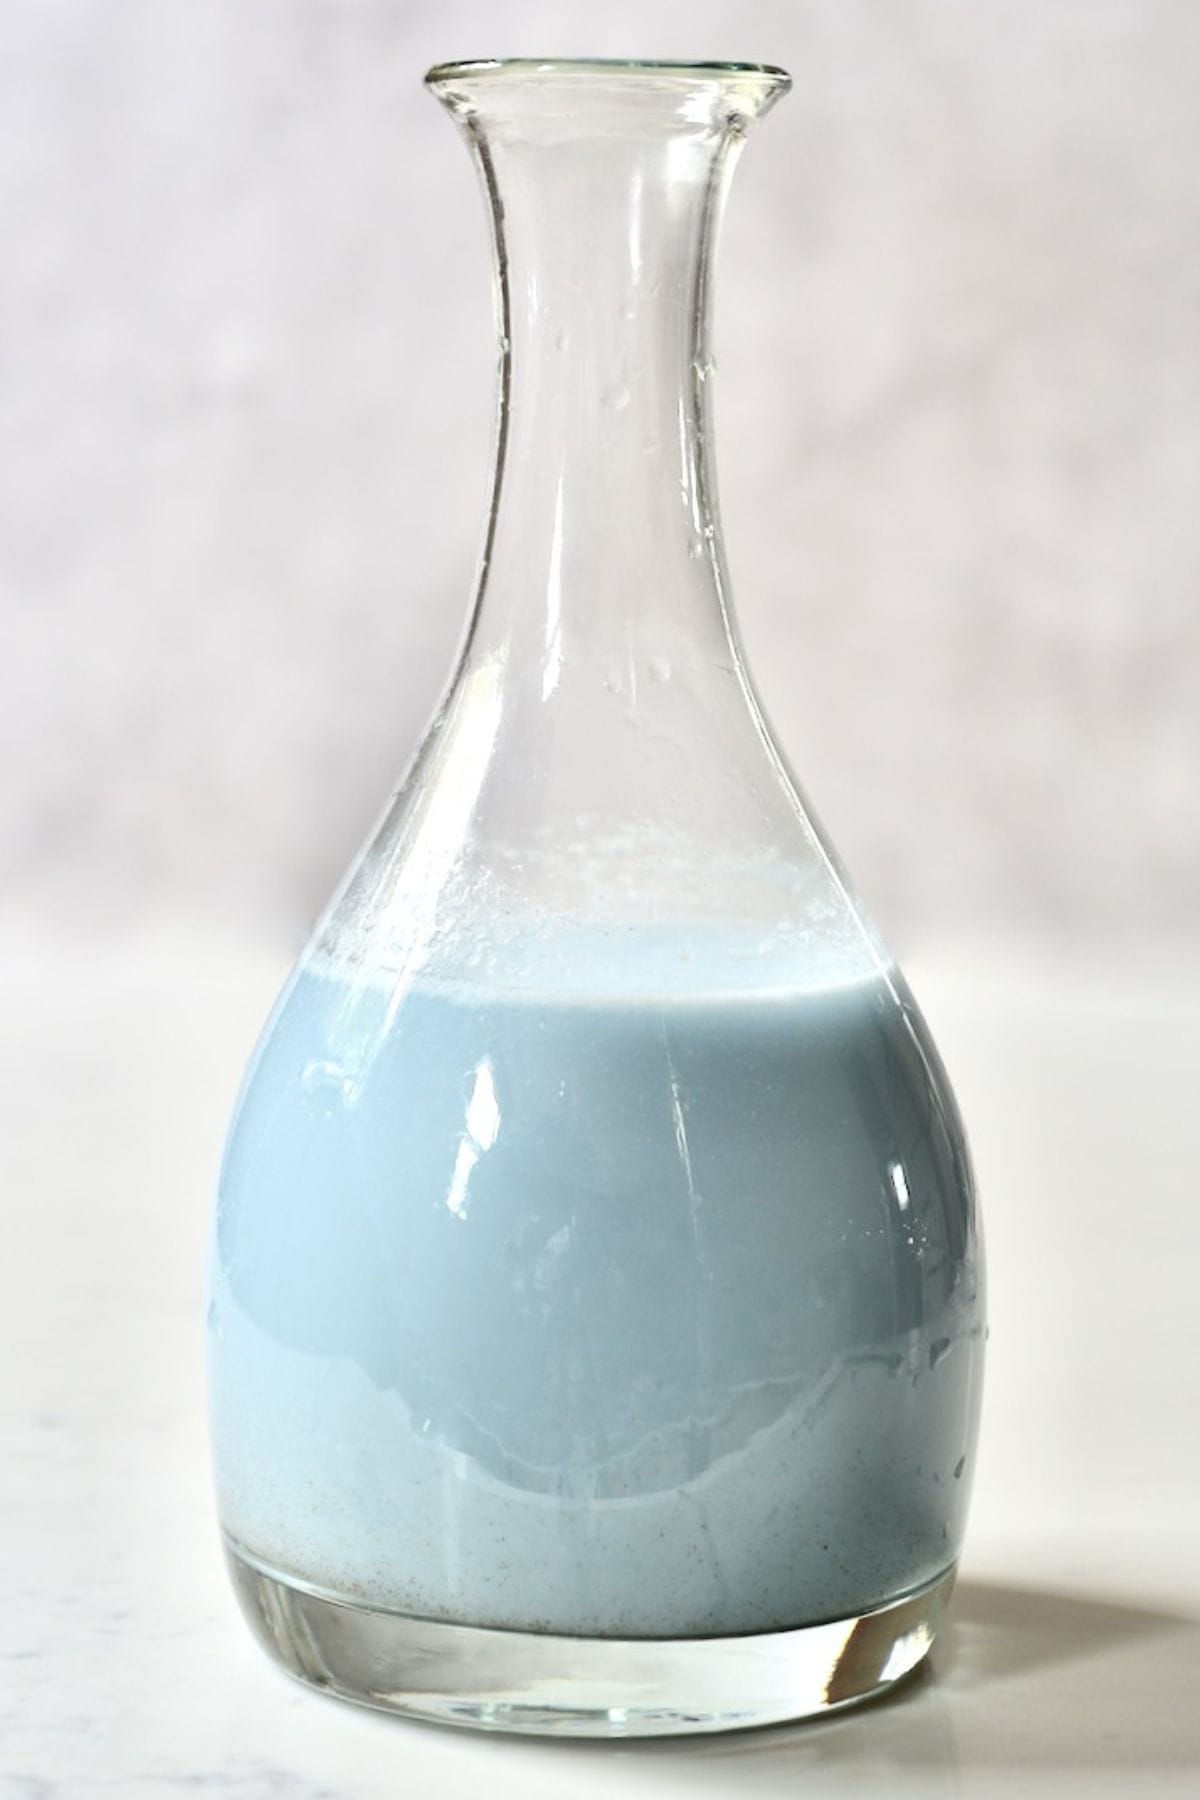 A bottle with Blue Milk from Star Wars